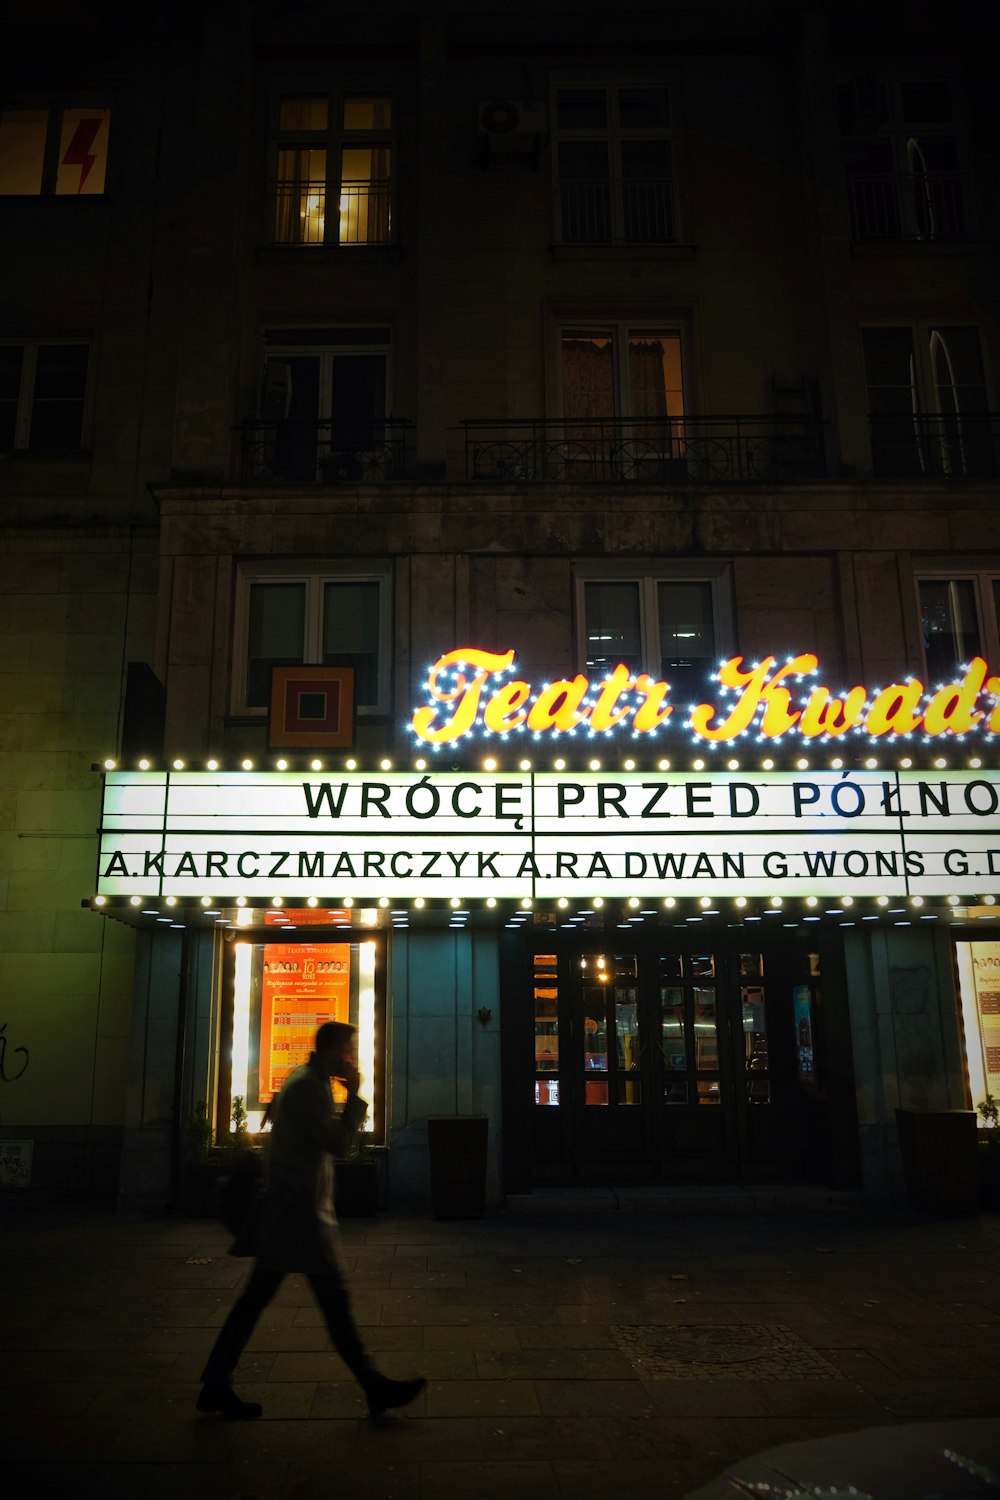 a person walking past a theater marquee at night